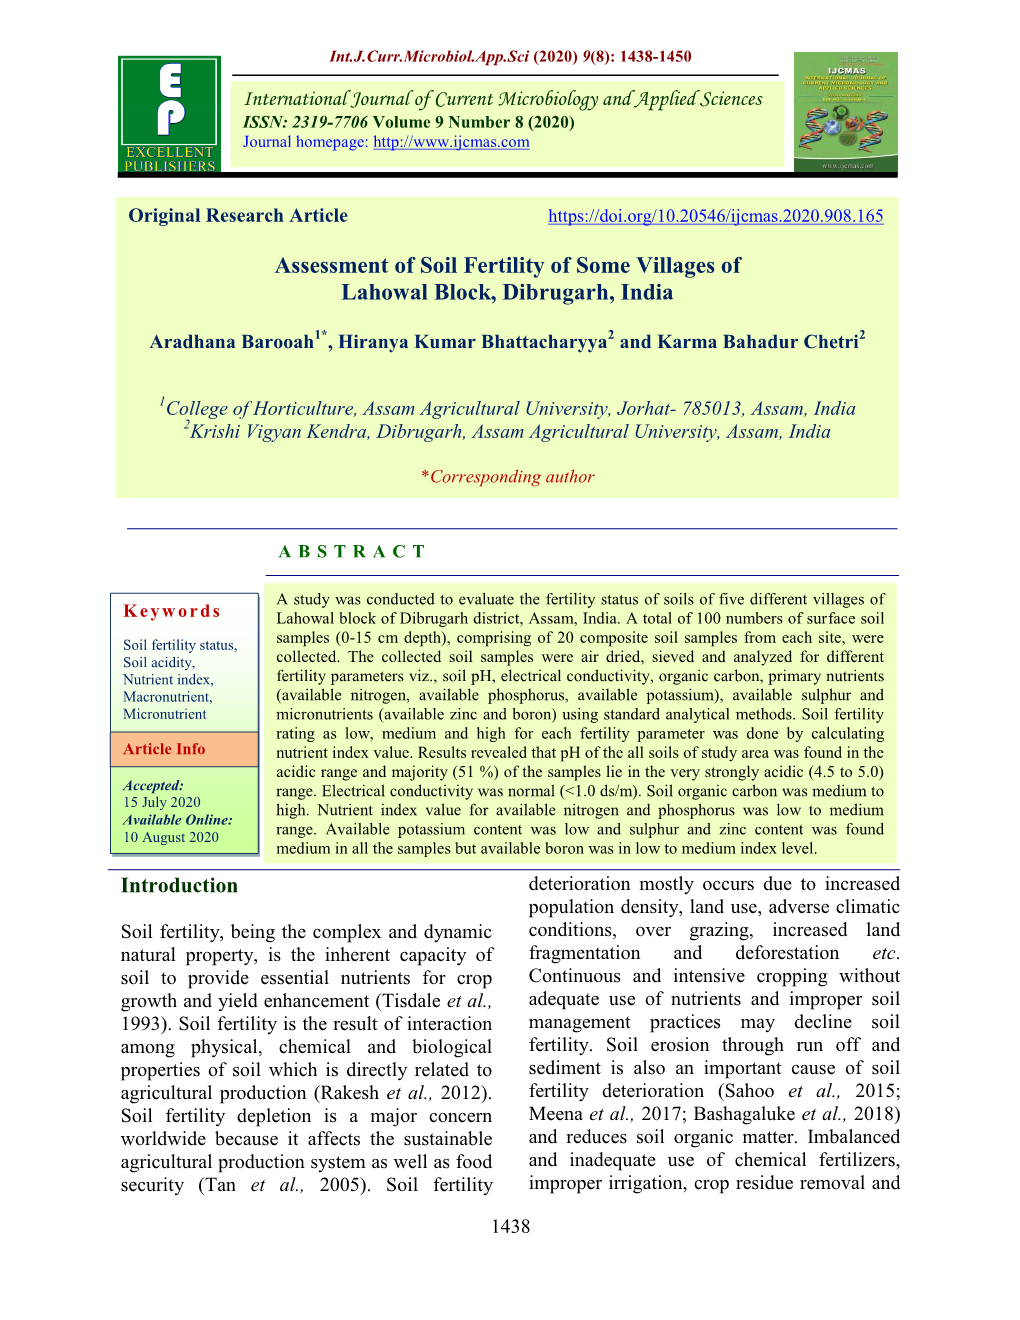 Assessment of Soil Fertility of Some Villages of Lahowal Block, Dibrugarh, India